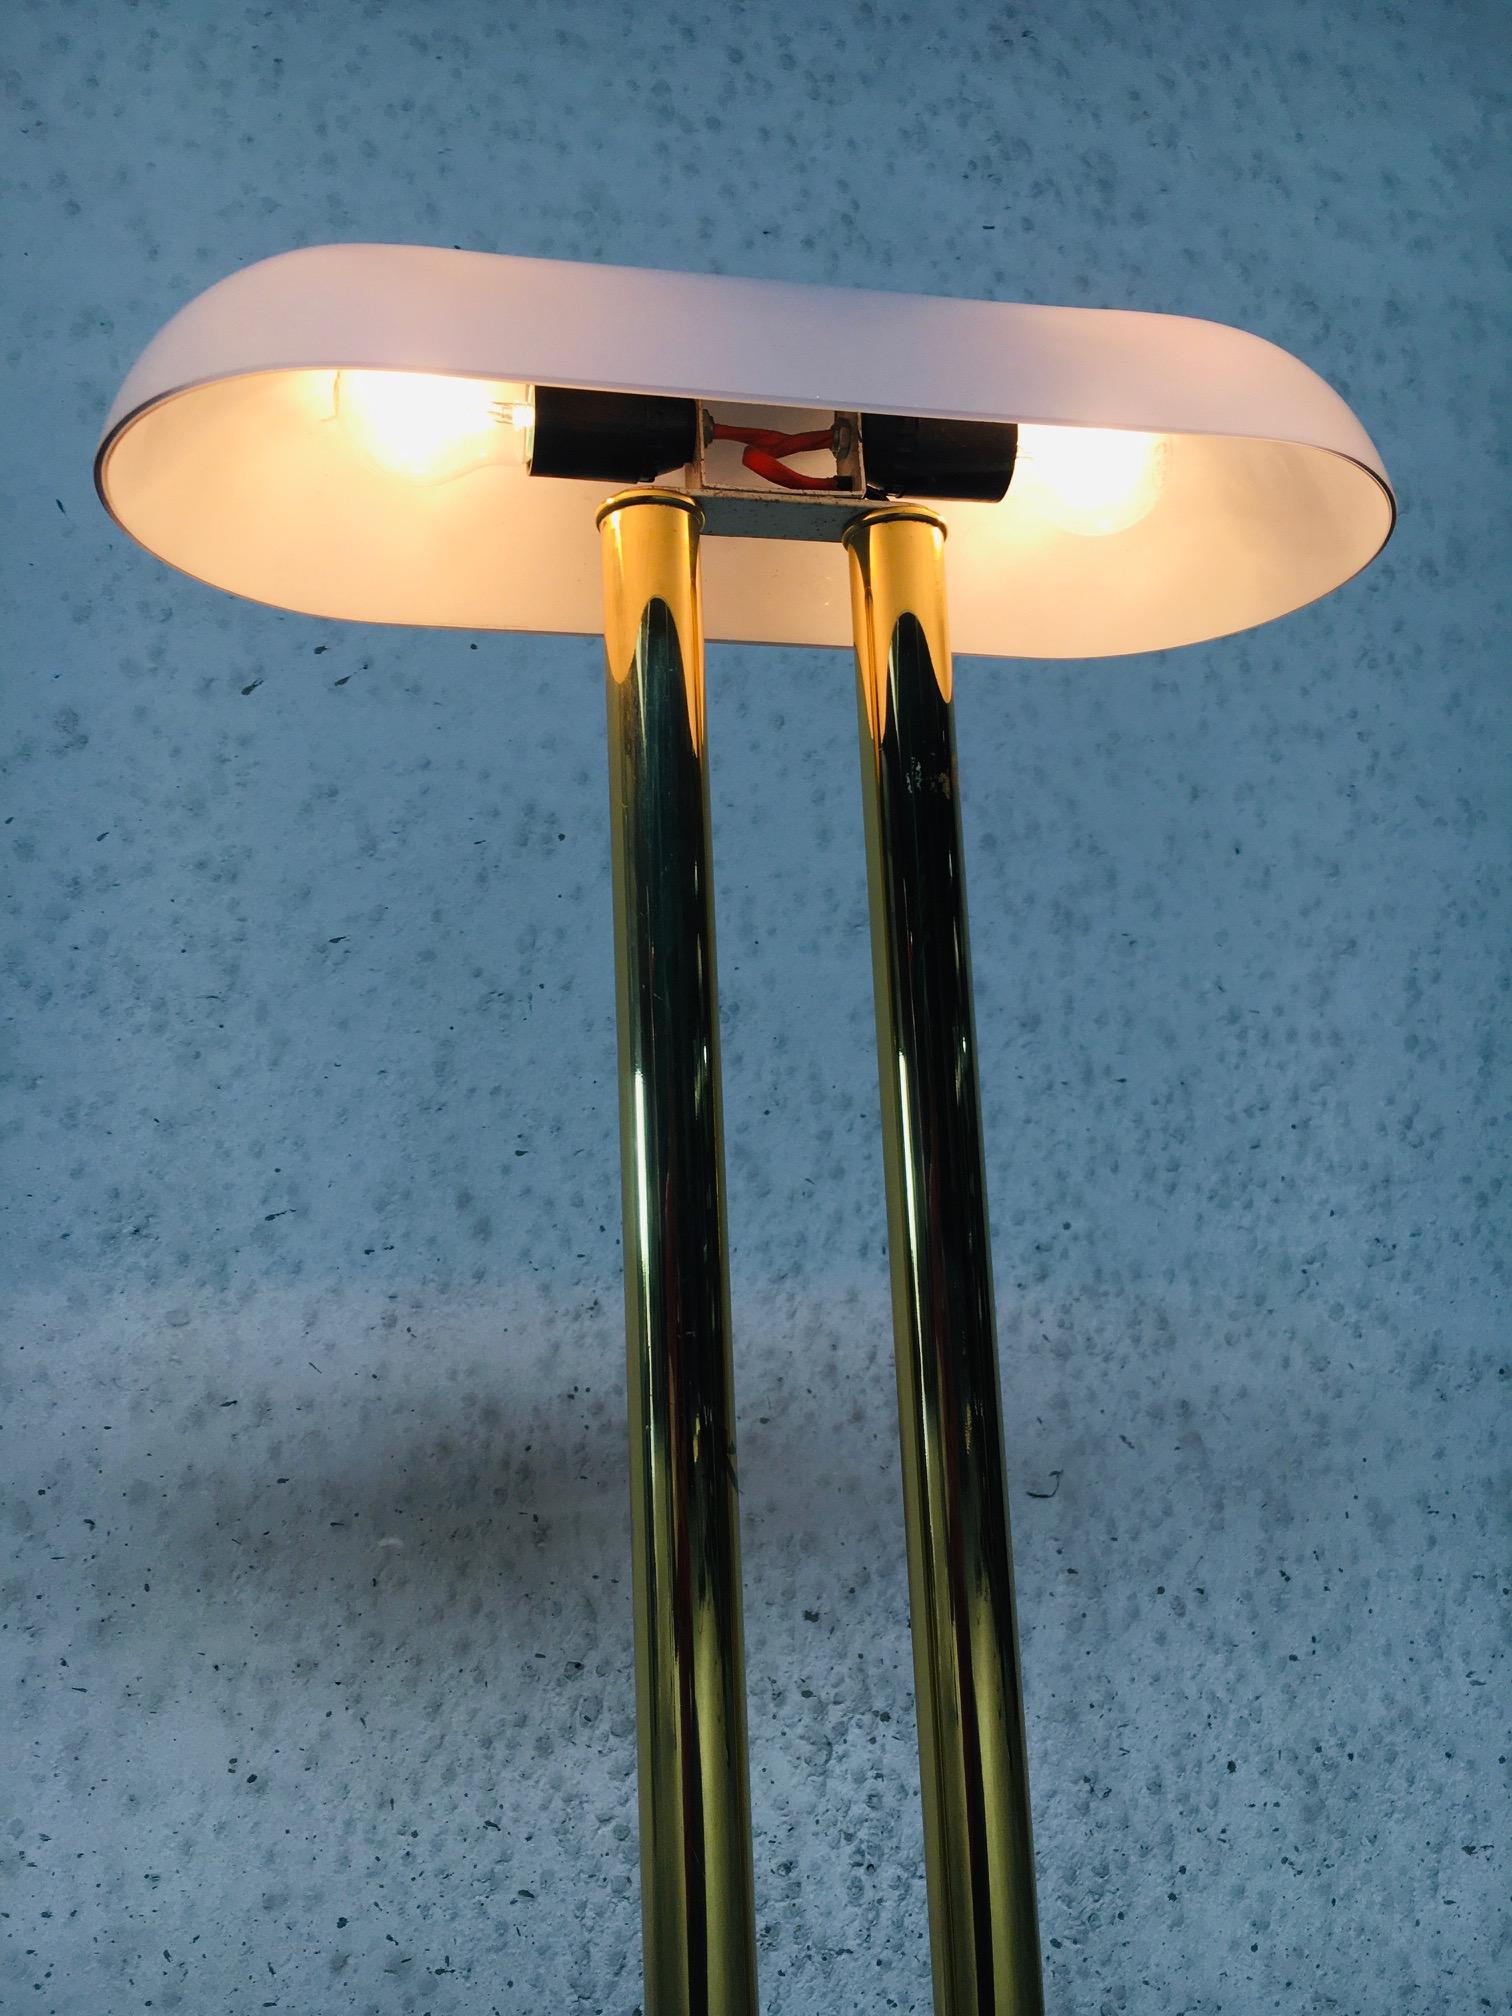 Mid-Century Modern Design Floor Lamp by Vibia Spain, 1970's For Sale 3